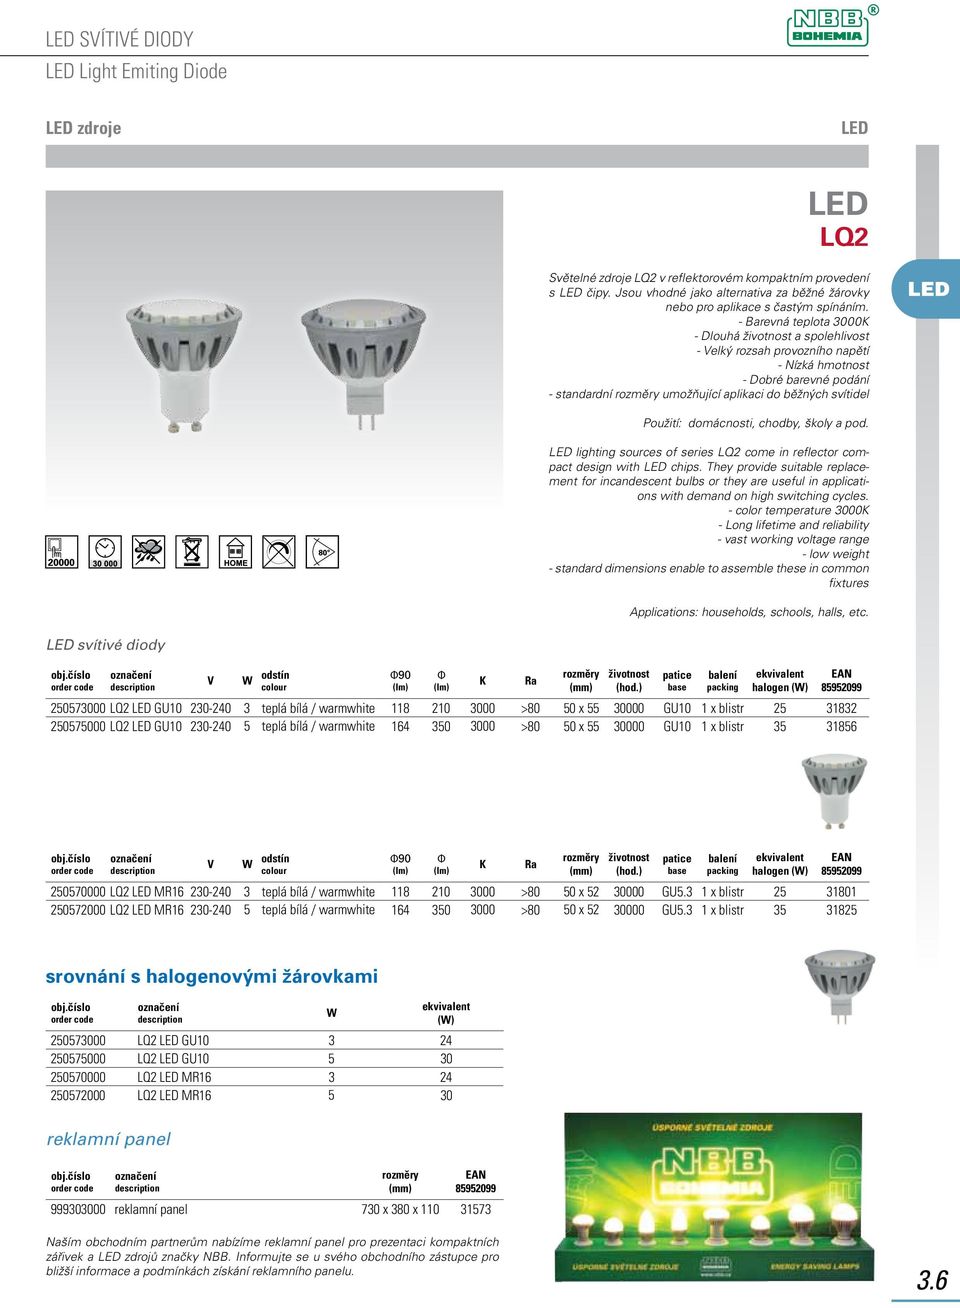 chodby, školy a pod. lighting sources of series LQ2 come in reflector compact design with chips.